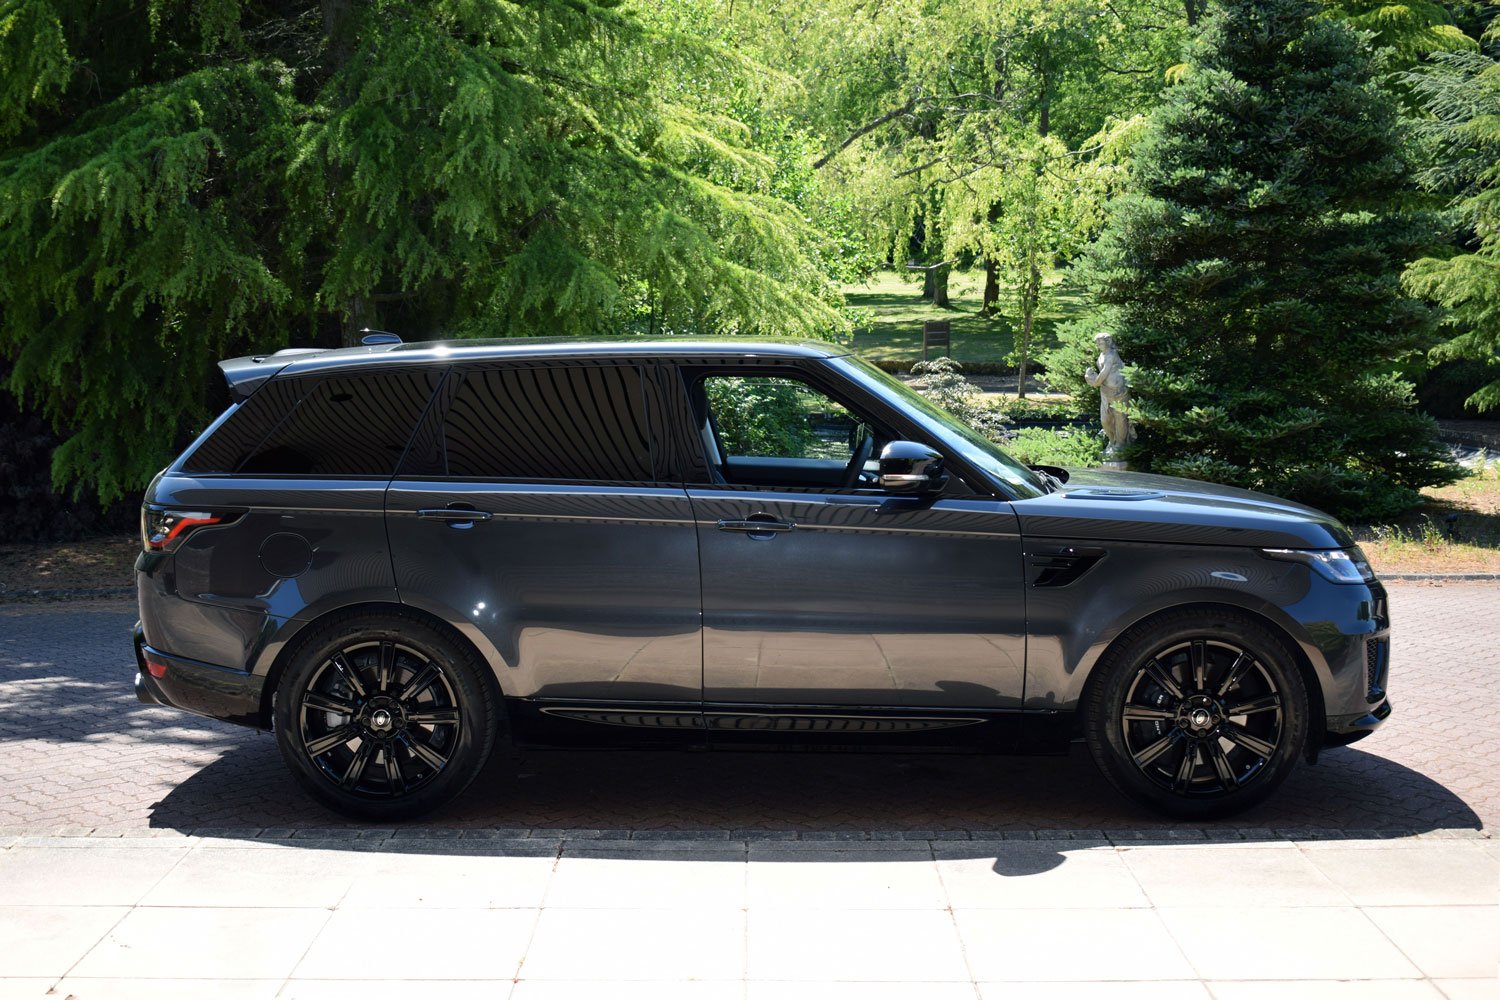 Range Rover Sport 3.0 V6 SuperCharged - Sport System with Sound Architect (2018-20)